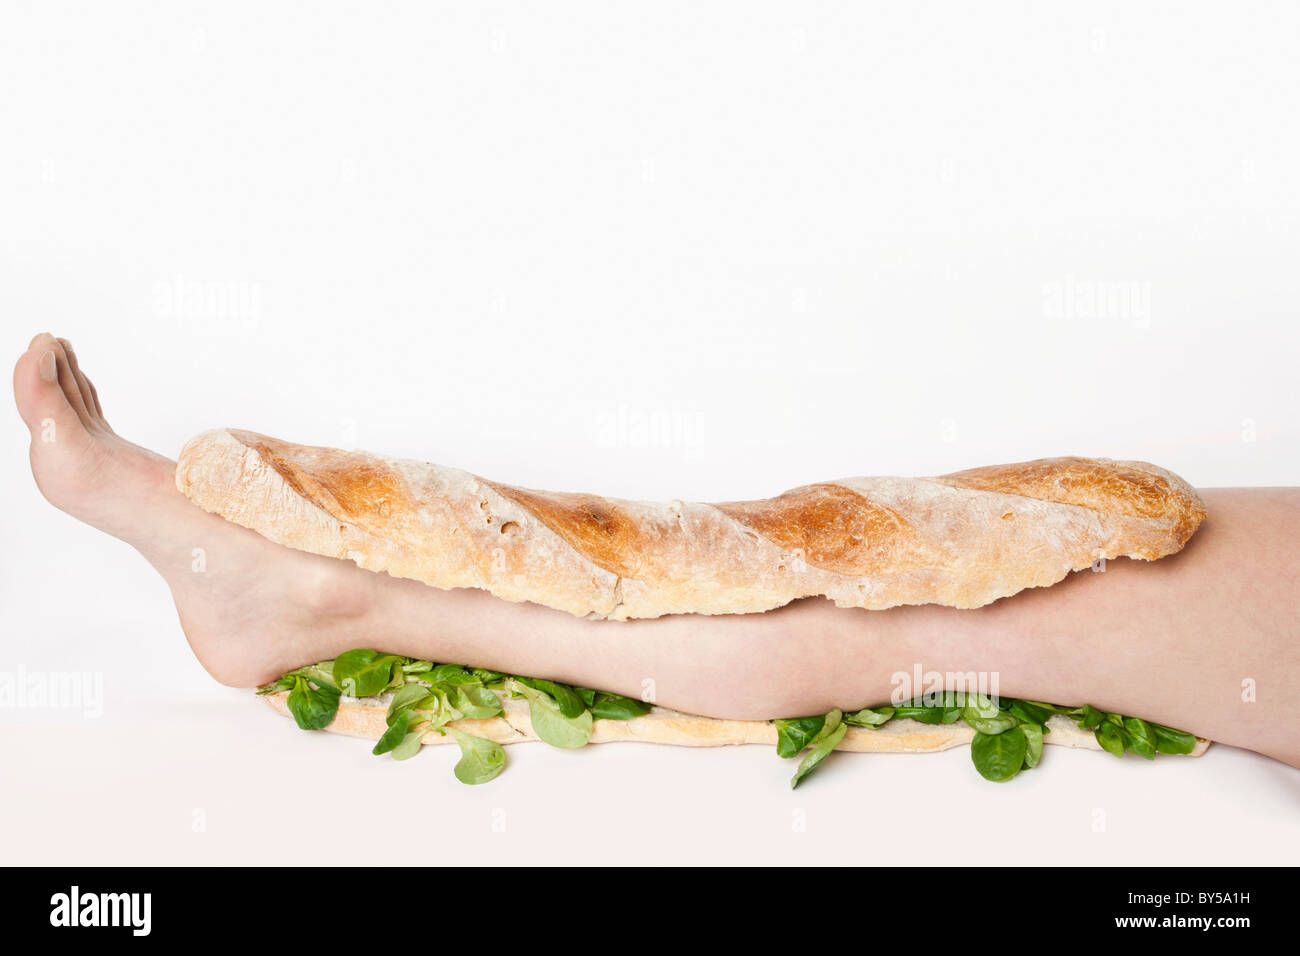 A submarine sandwich with a human leg in it Stock Photo